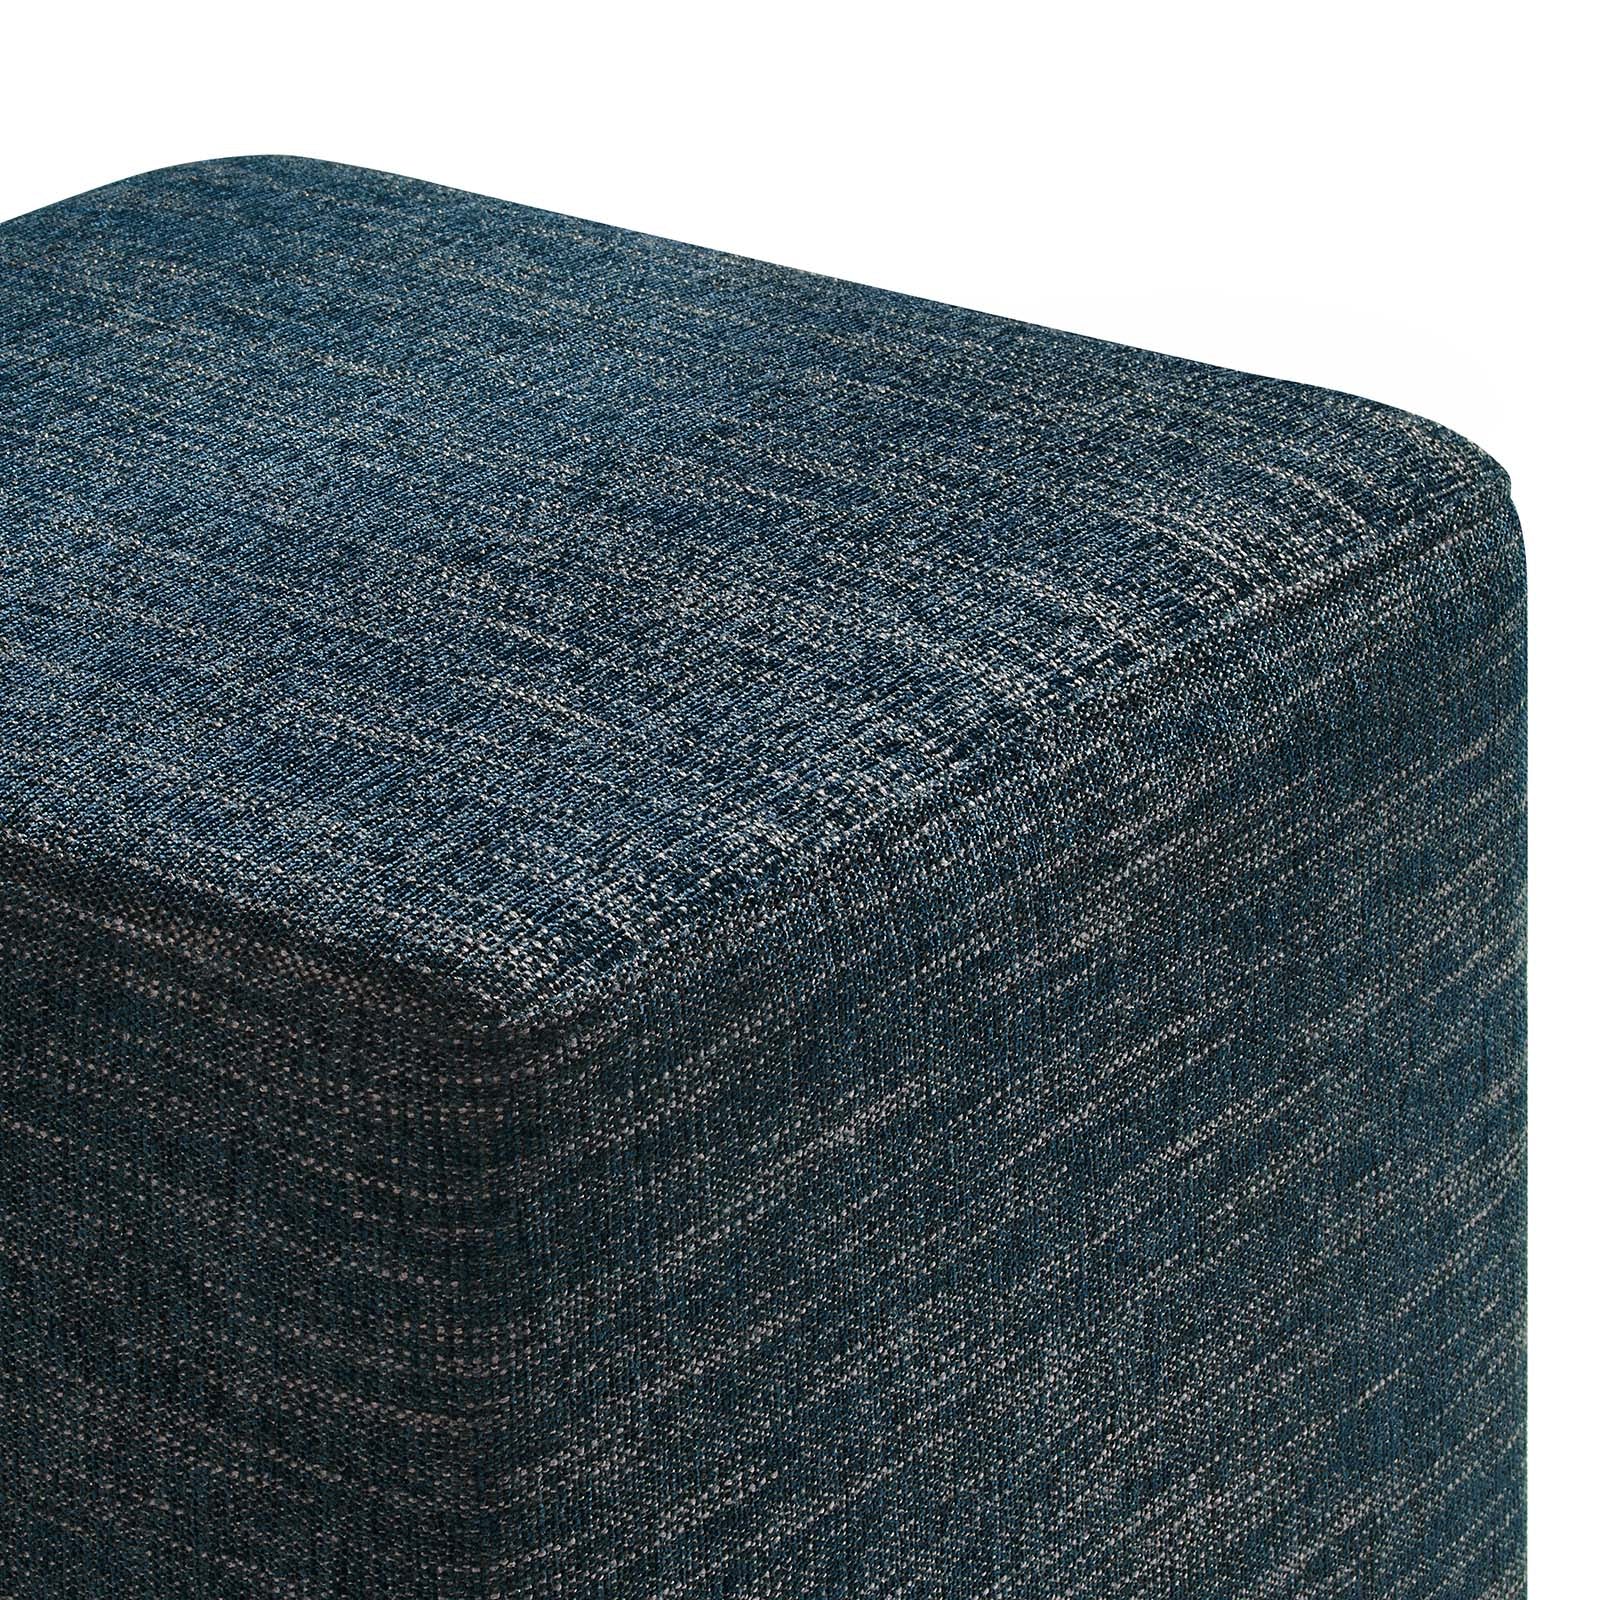 Callum 17" Square Woven Heathered Fabric Upholstered Ottoman - East Shore Modern Home Furnishings